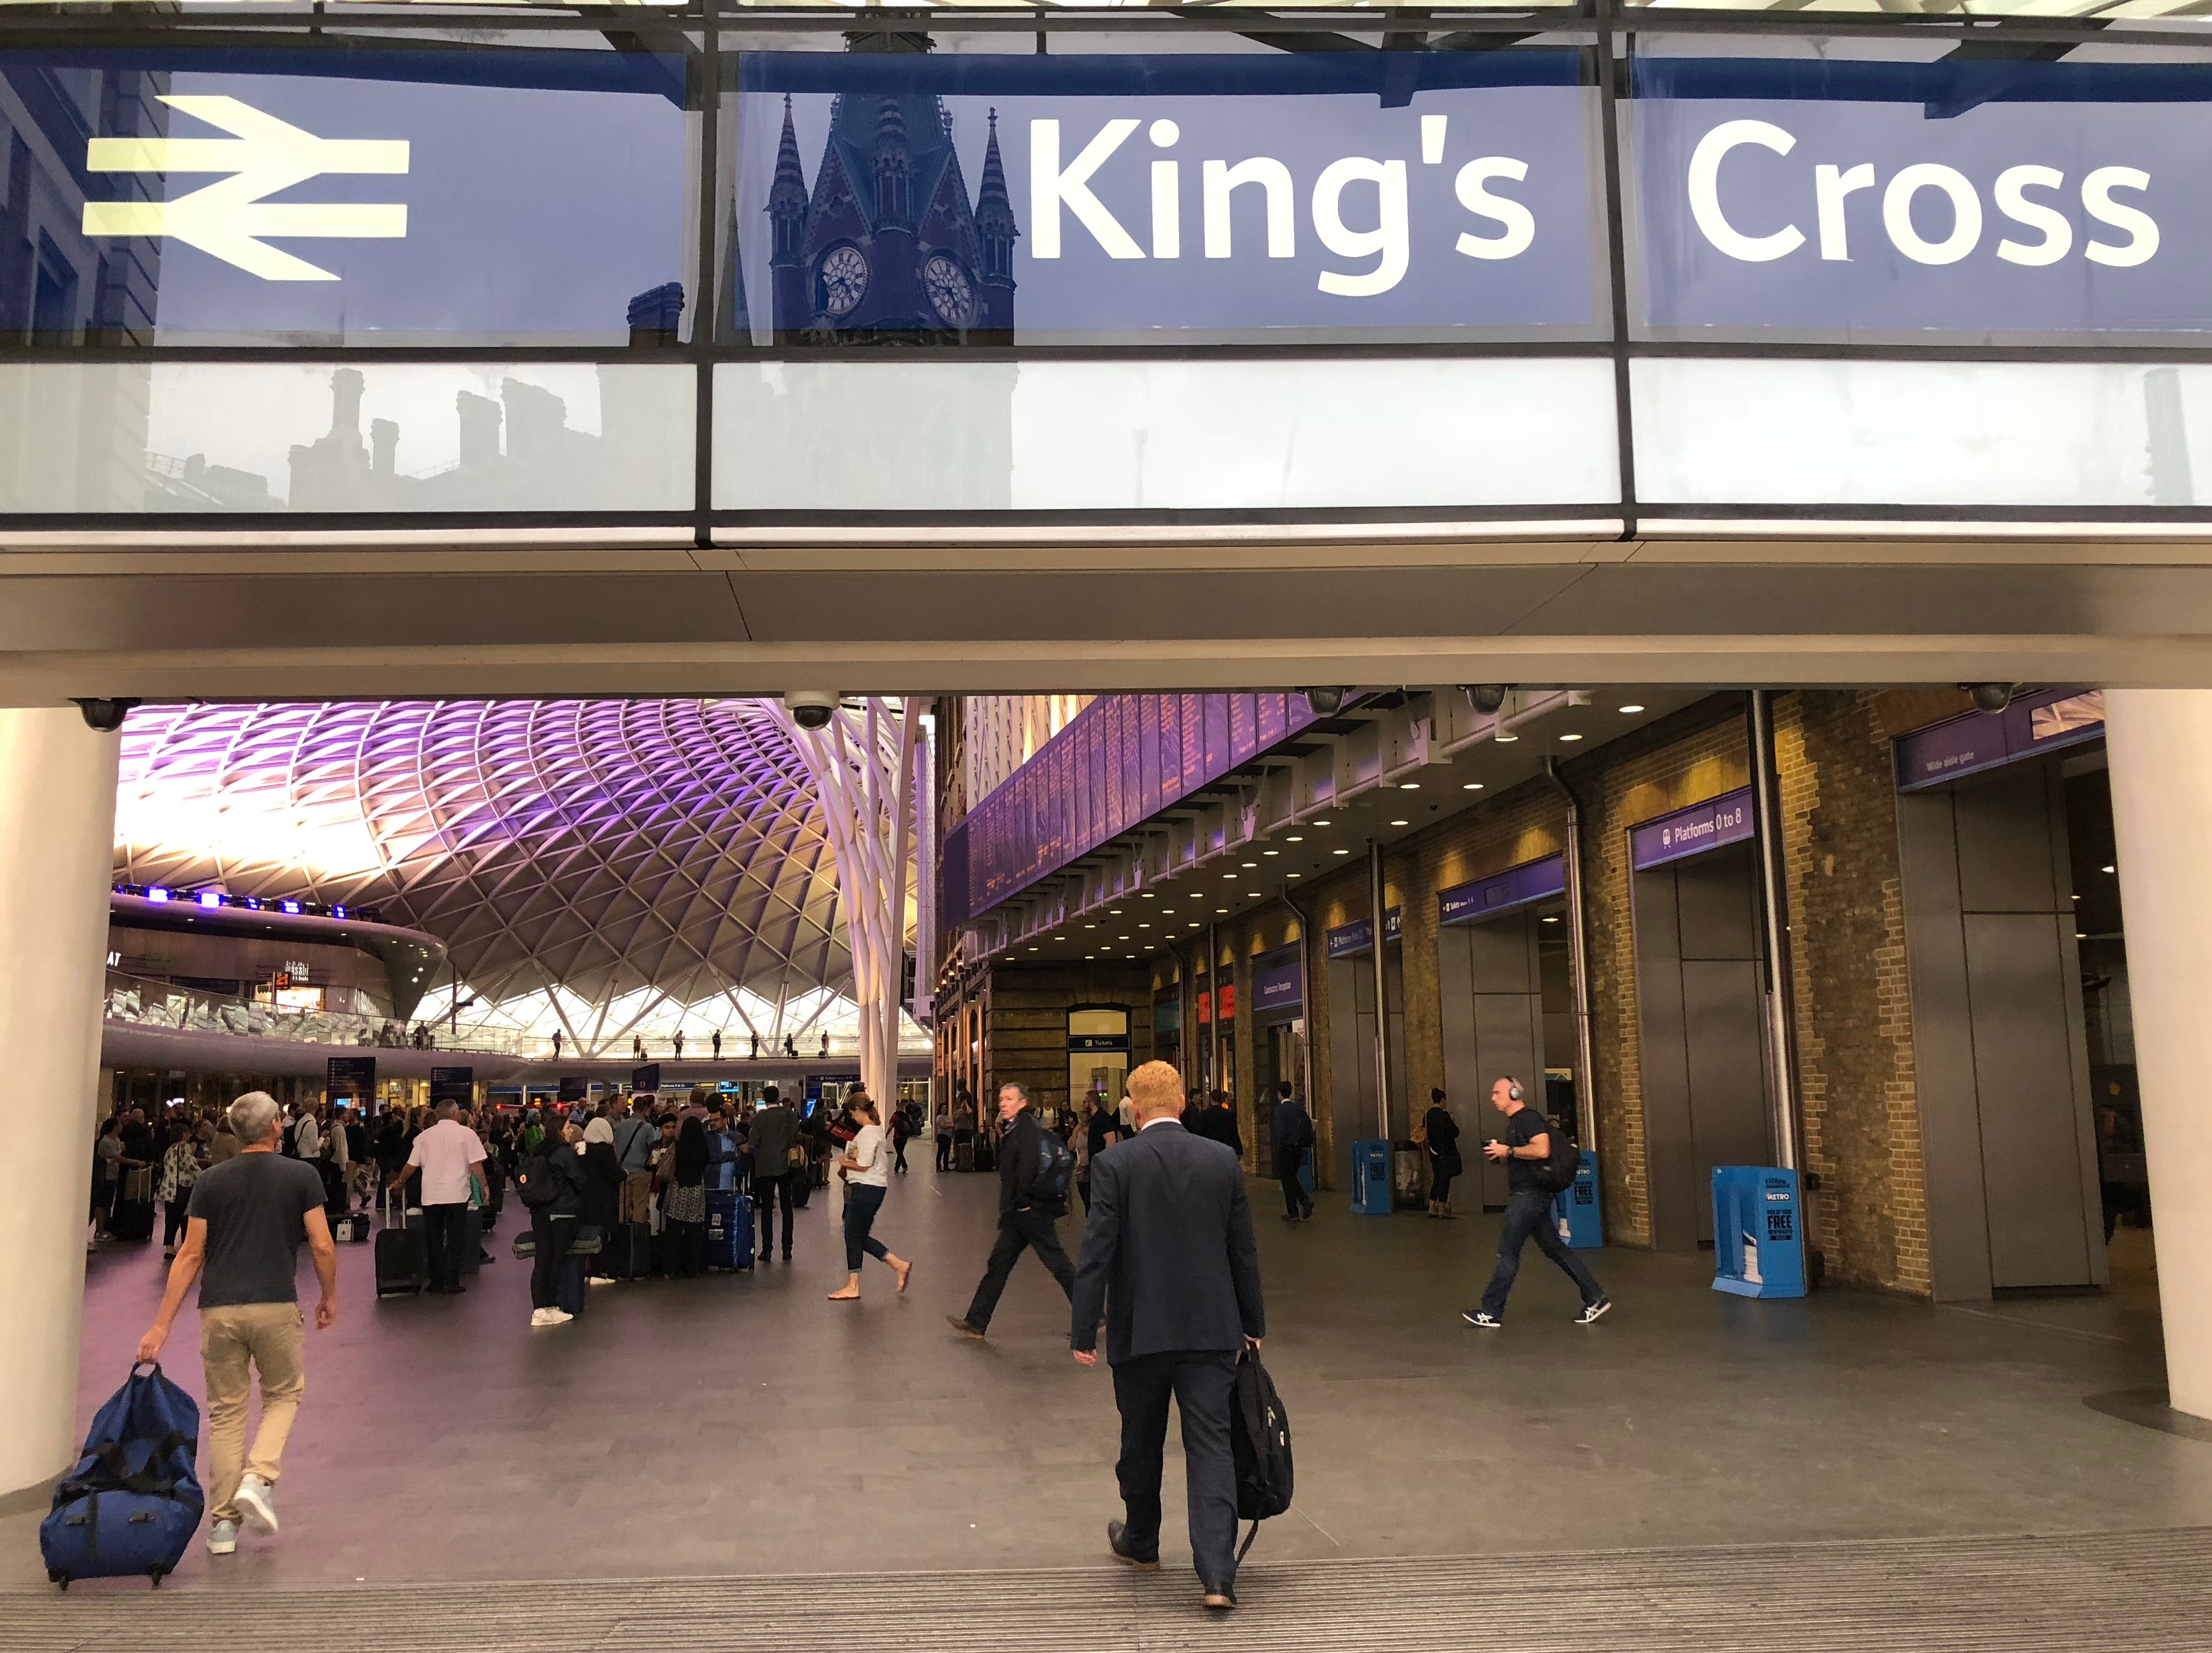 Close down: King’s Cross, one of the busiest stations in Britain, will have no trains from the evening of Christmas Eve to the morning of New Year’s Eve